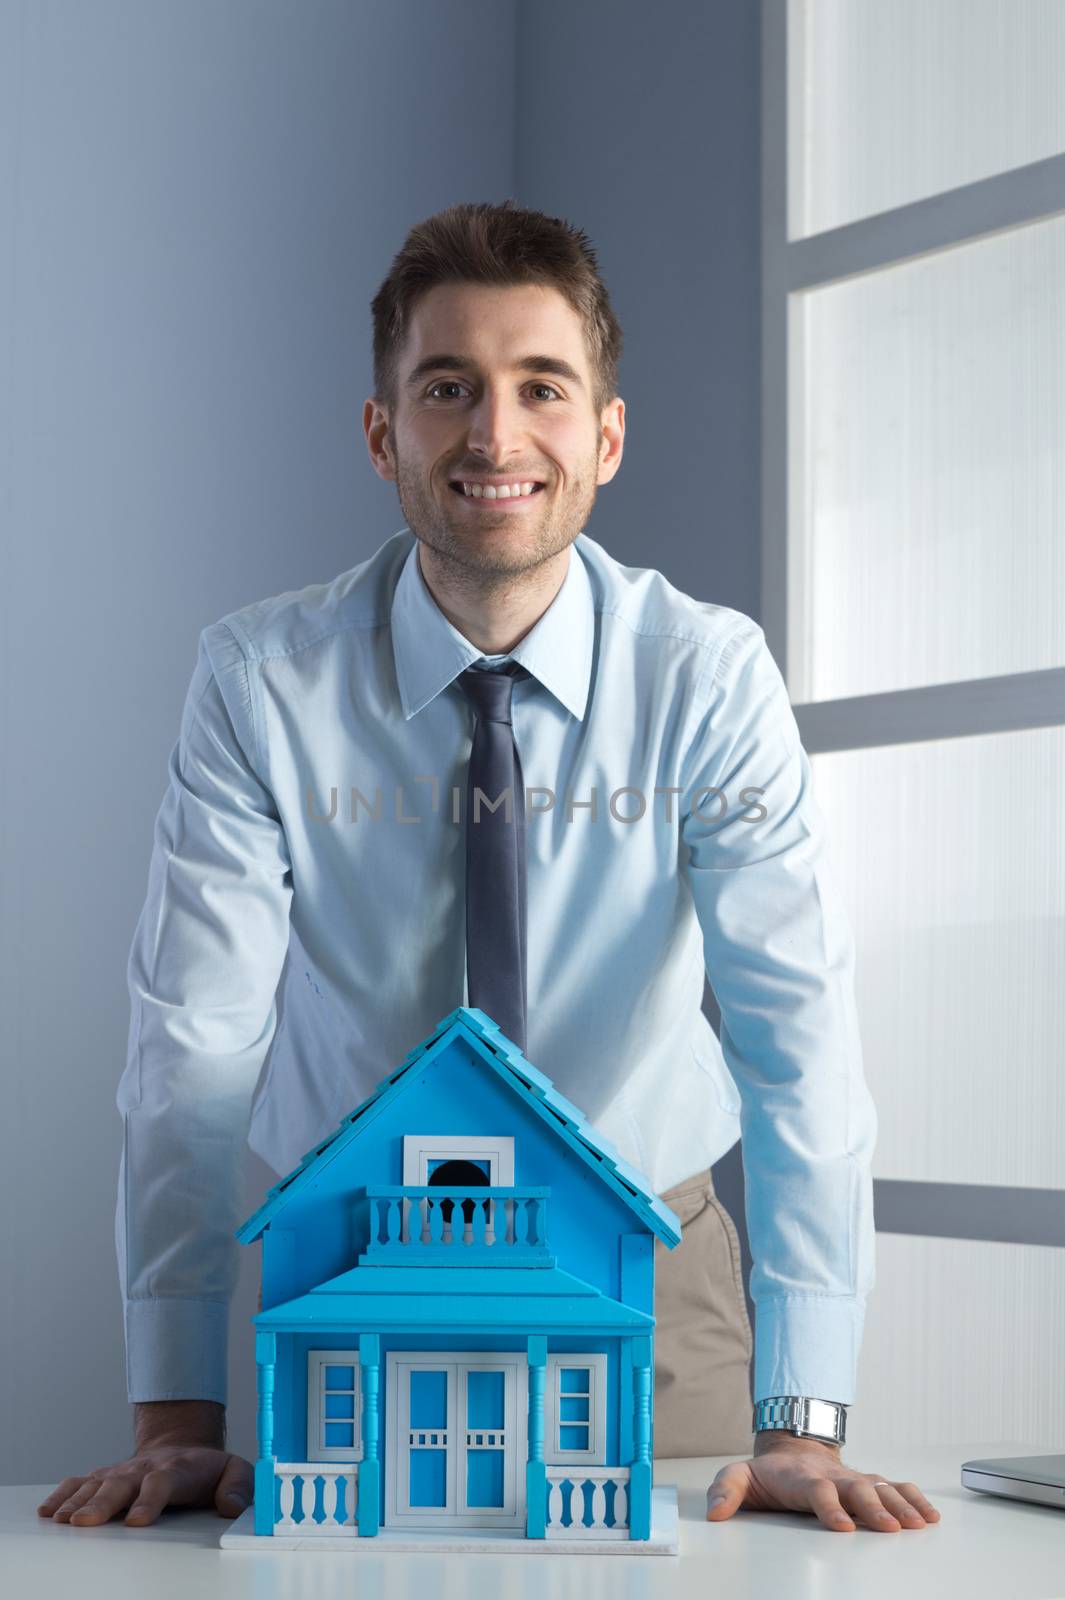 Young real estate agent leaning on desk with model house.